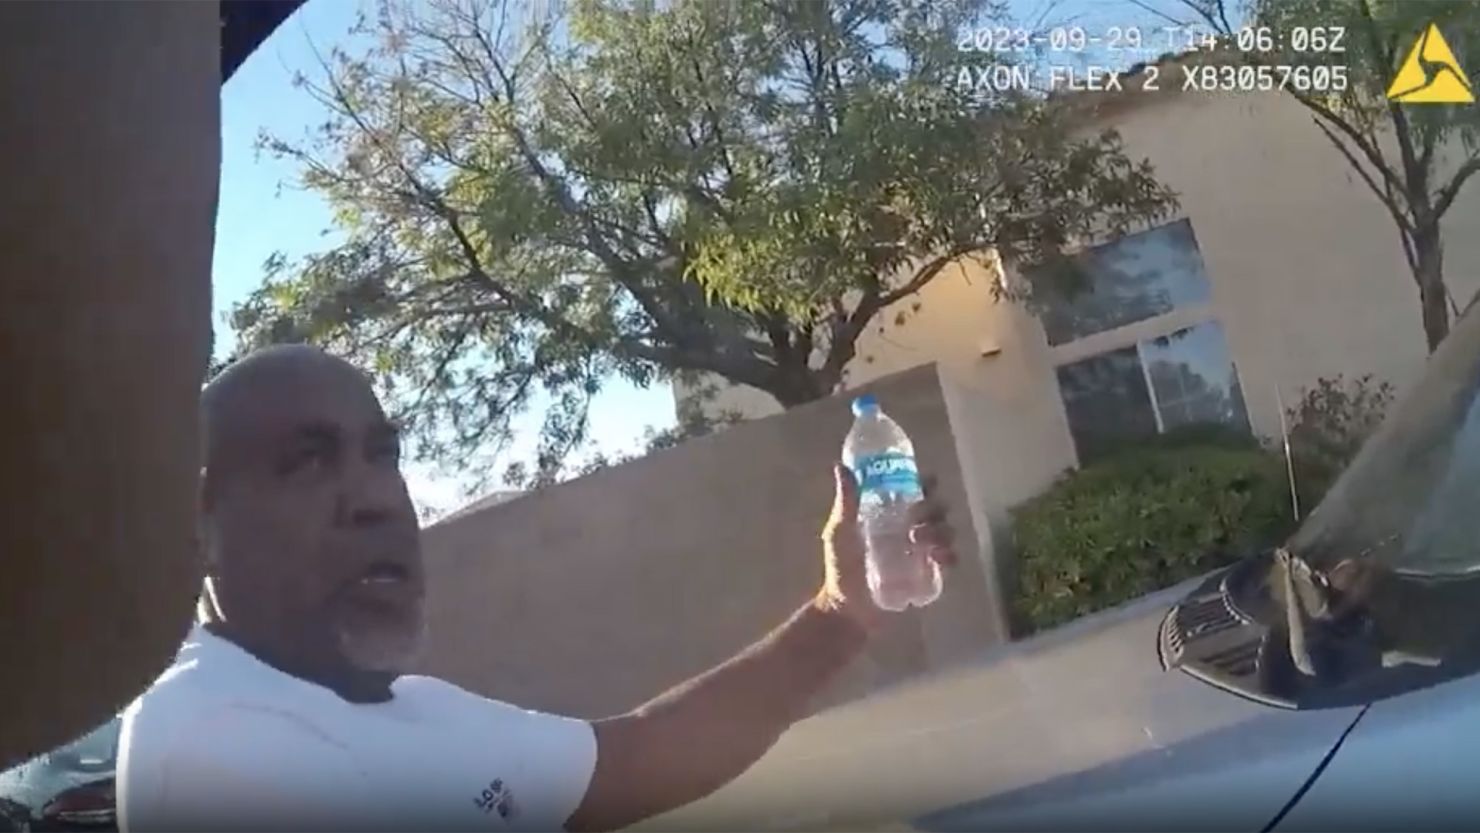 Body camera footage from the Las Vegas arrest of Duane Davis, who is accused of killing of rapper Tupac Shakur. The footage was obtained by CNN affiliate KVVU.